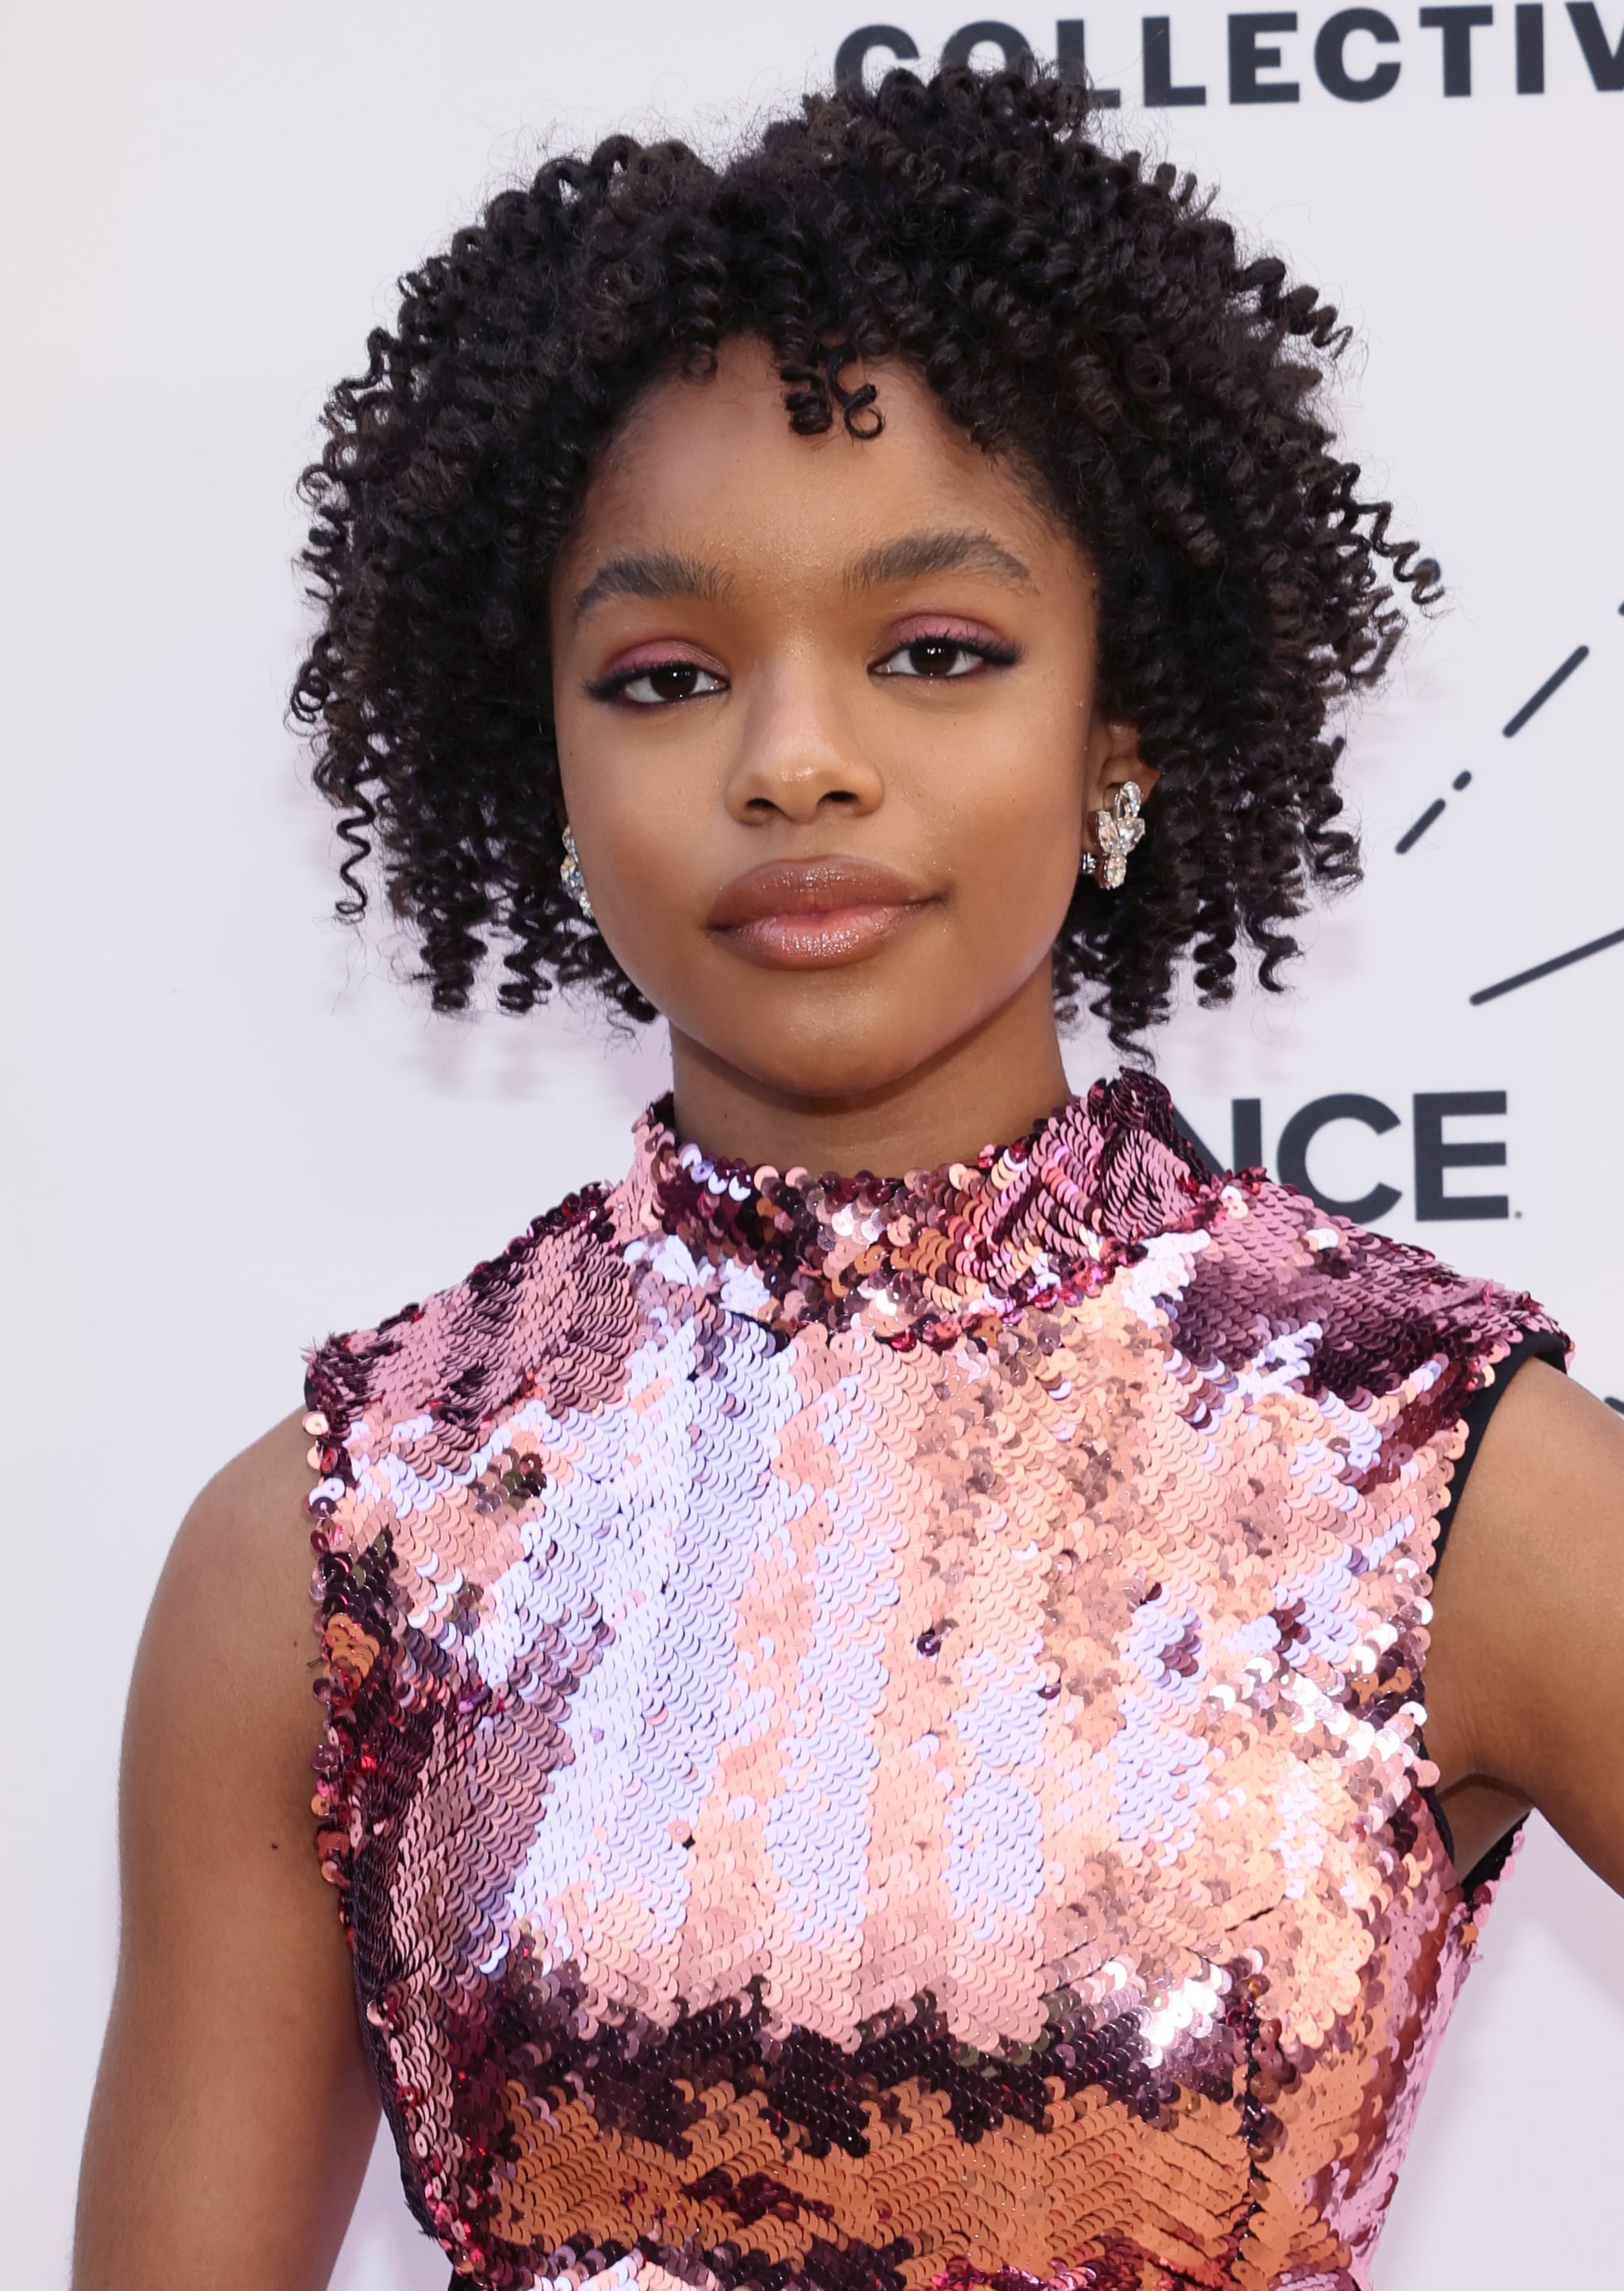 BEVERLY HILLS, CALIFORNIA - MARCH 24: Marsai Martin attends the ESSENCE 15th Anniversary Black Women In Hollywood Awards highlighting 